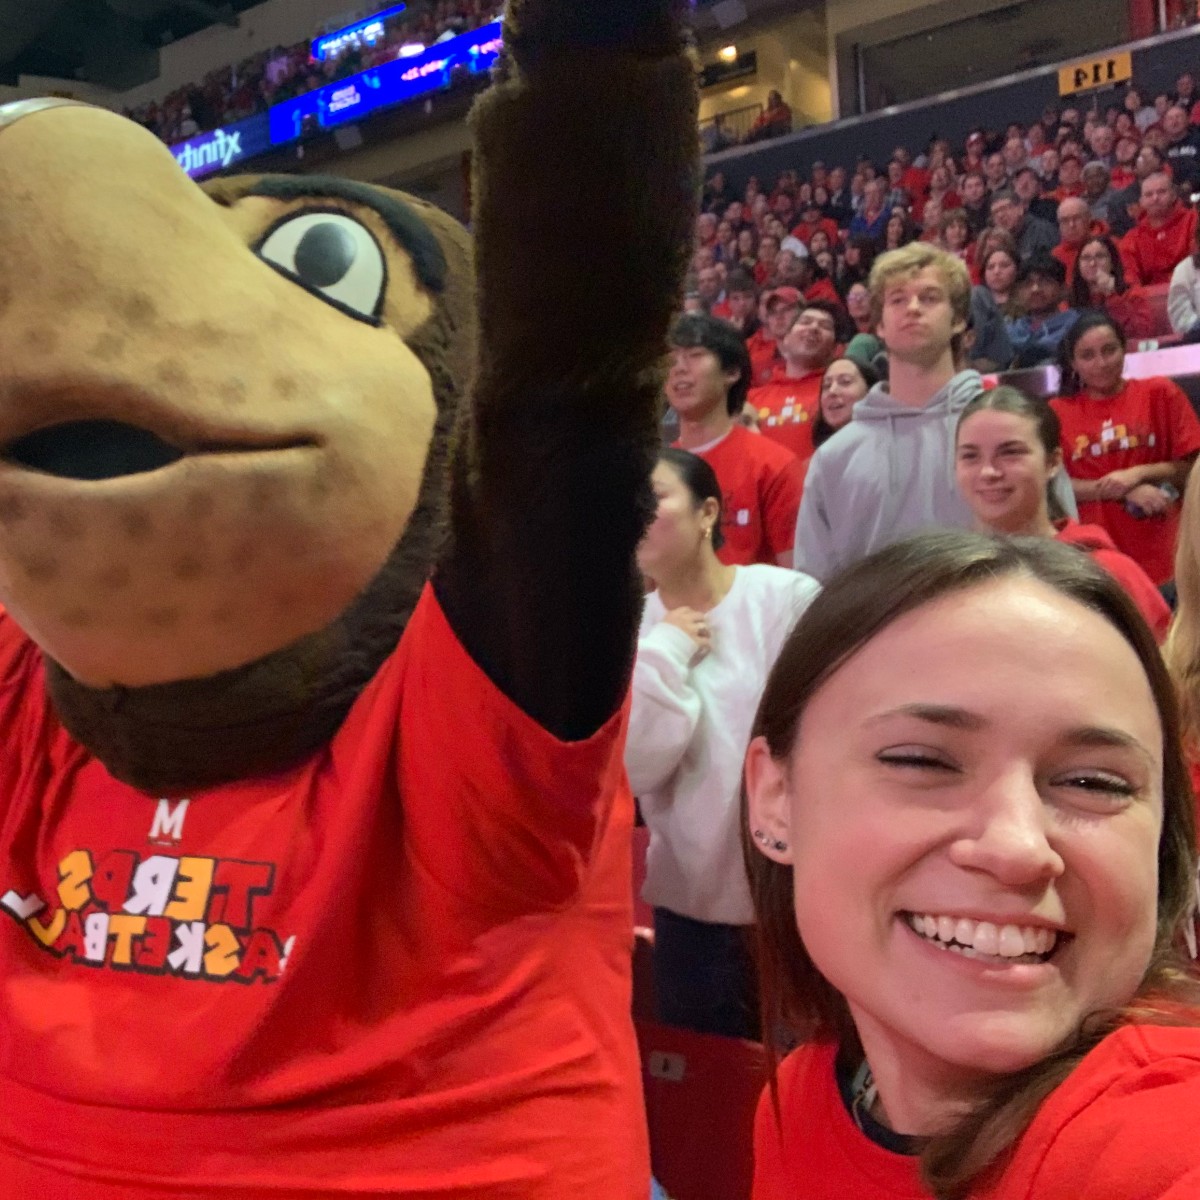 Junior @UMDBIOE major Brooke Wunderler is taking over our Instagram today for #TakeoverTuesday! She will be highlighting her involvement on campus as a Maryland Engineering student! Follow along throughout the day at instagram.com/umdclarkschool 🐢